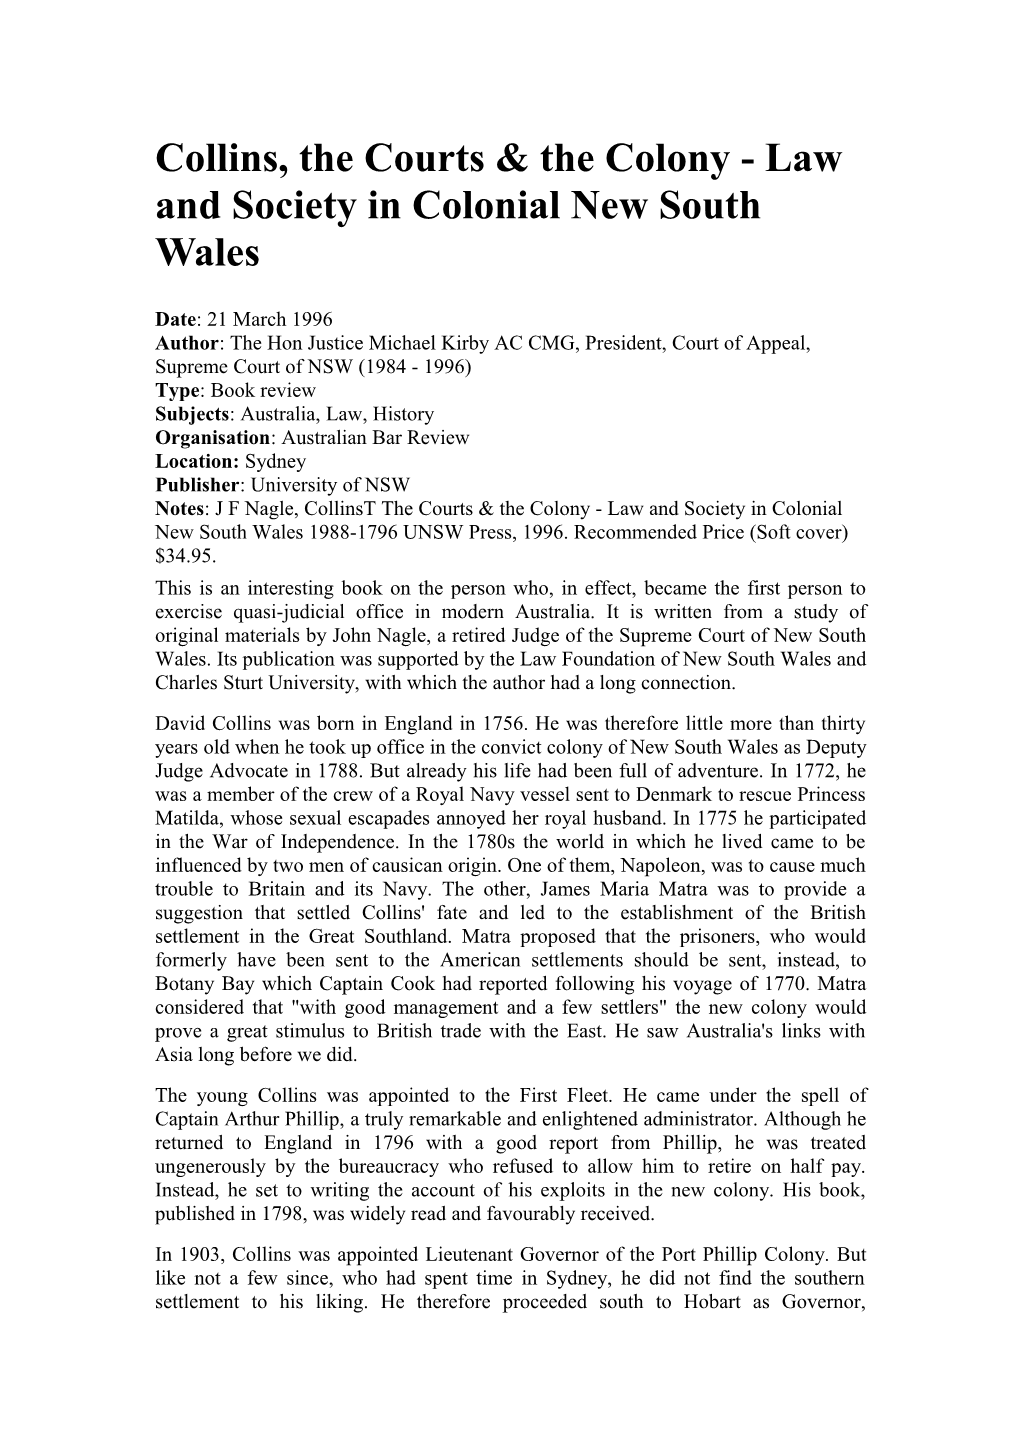 Collins, the Courts & the Colony - Law and Society in Colonial New South Wales